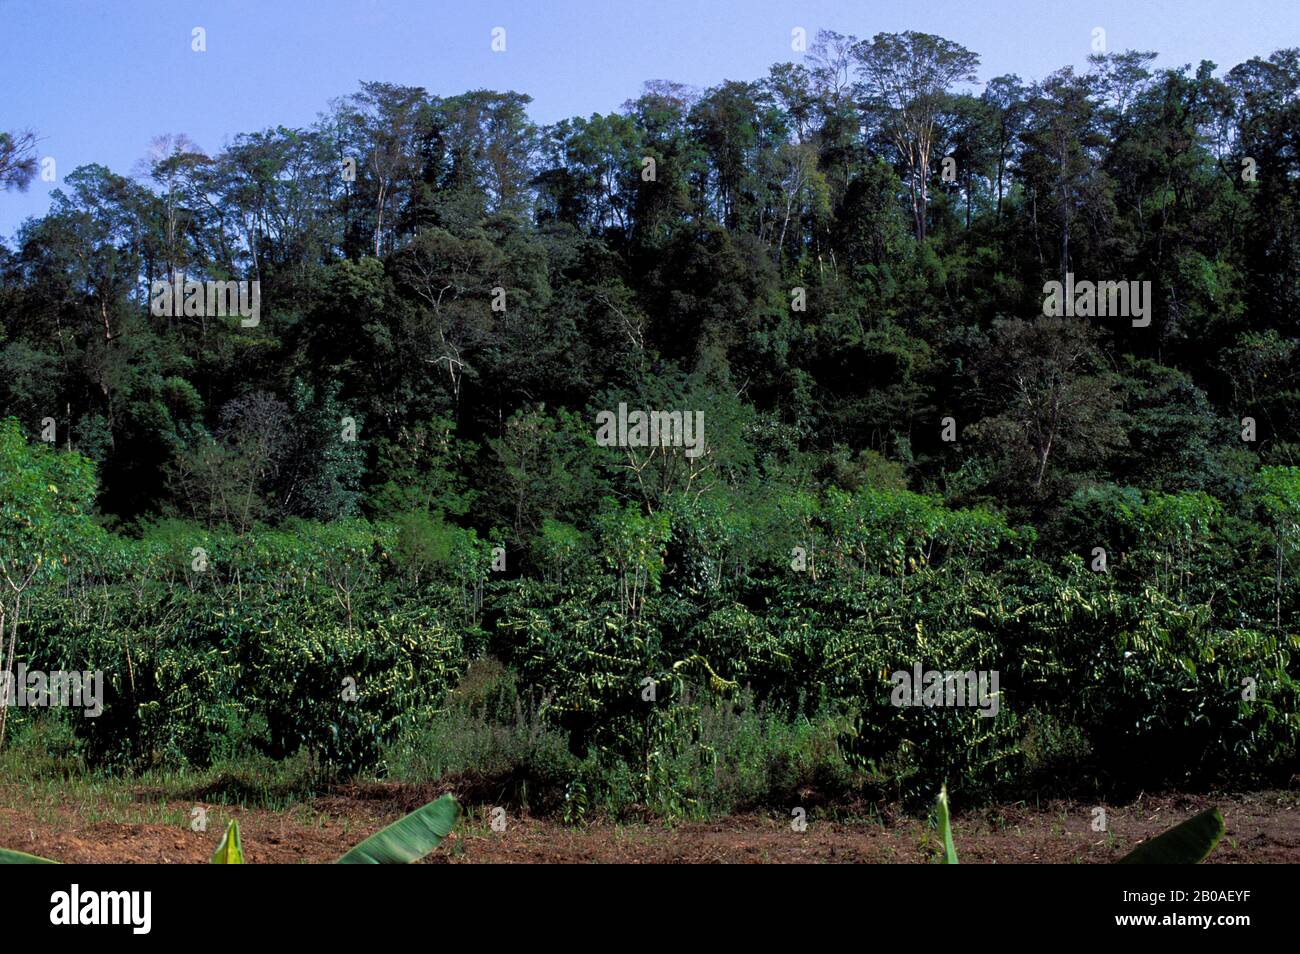 VIETNAM,CENTRAL HIGHLANDS, NEAR BUON MA THUOT, COFFEE PLANTATION, RAINFOREST IN BACKGROUND Stock Photo